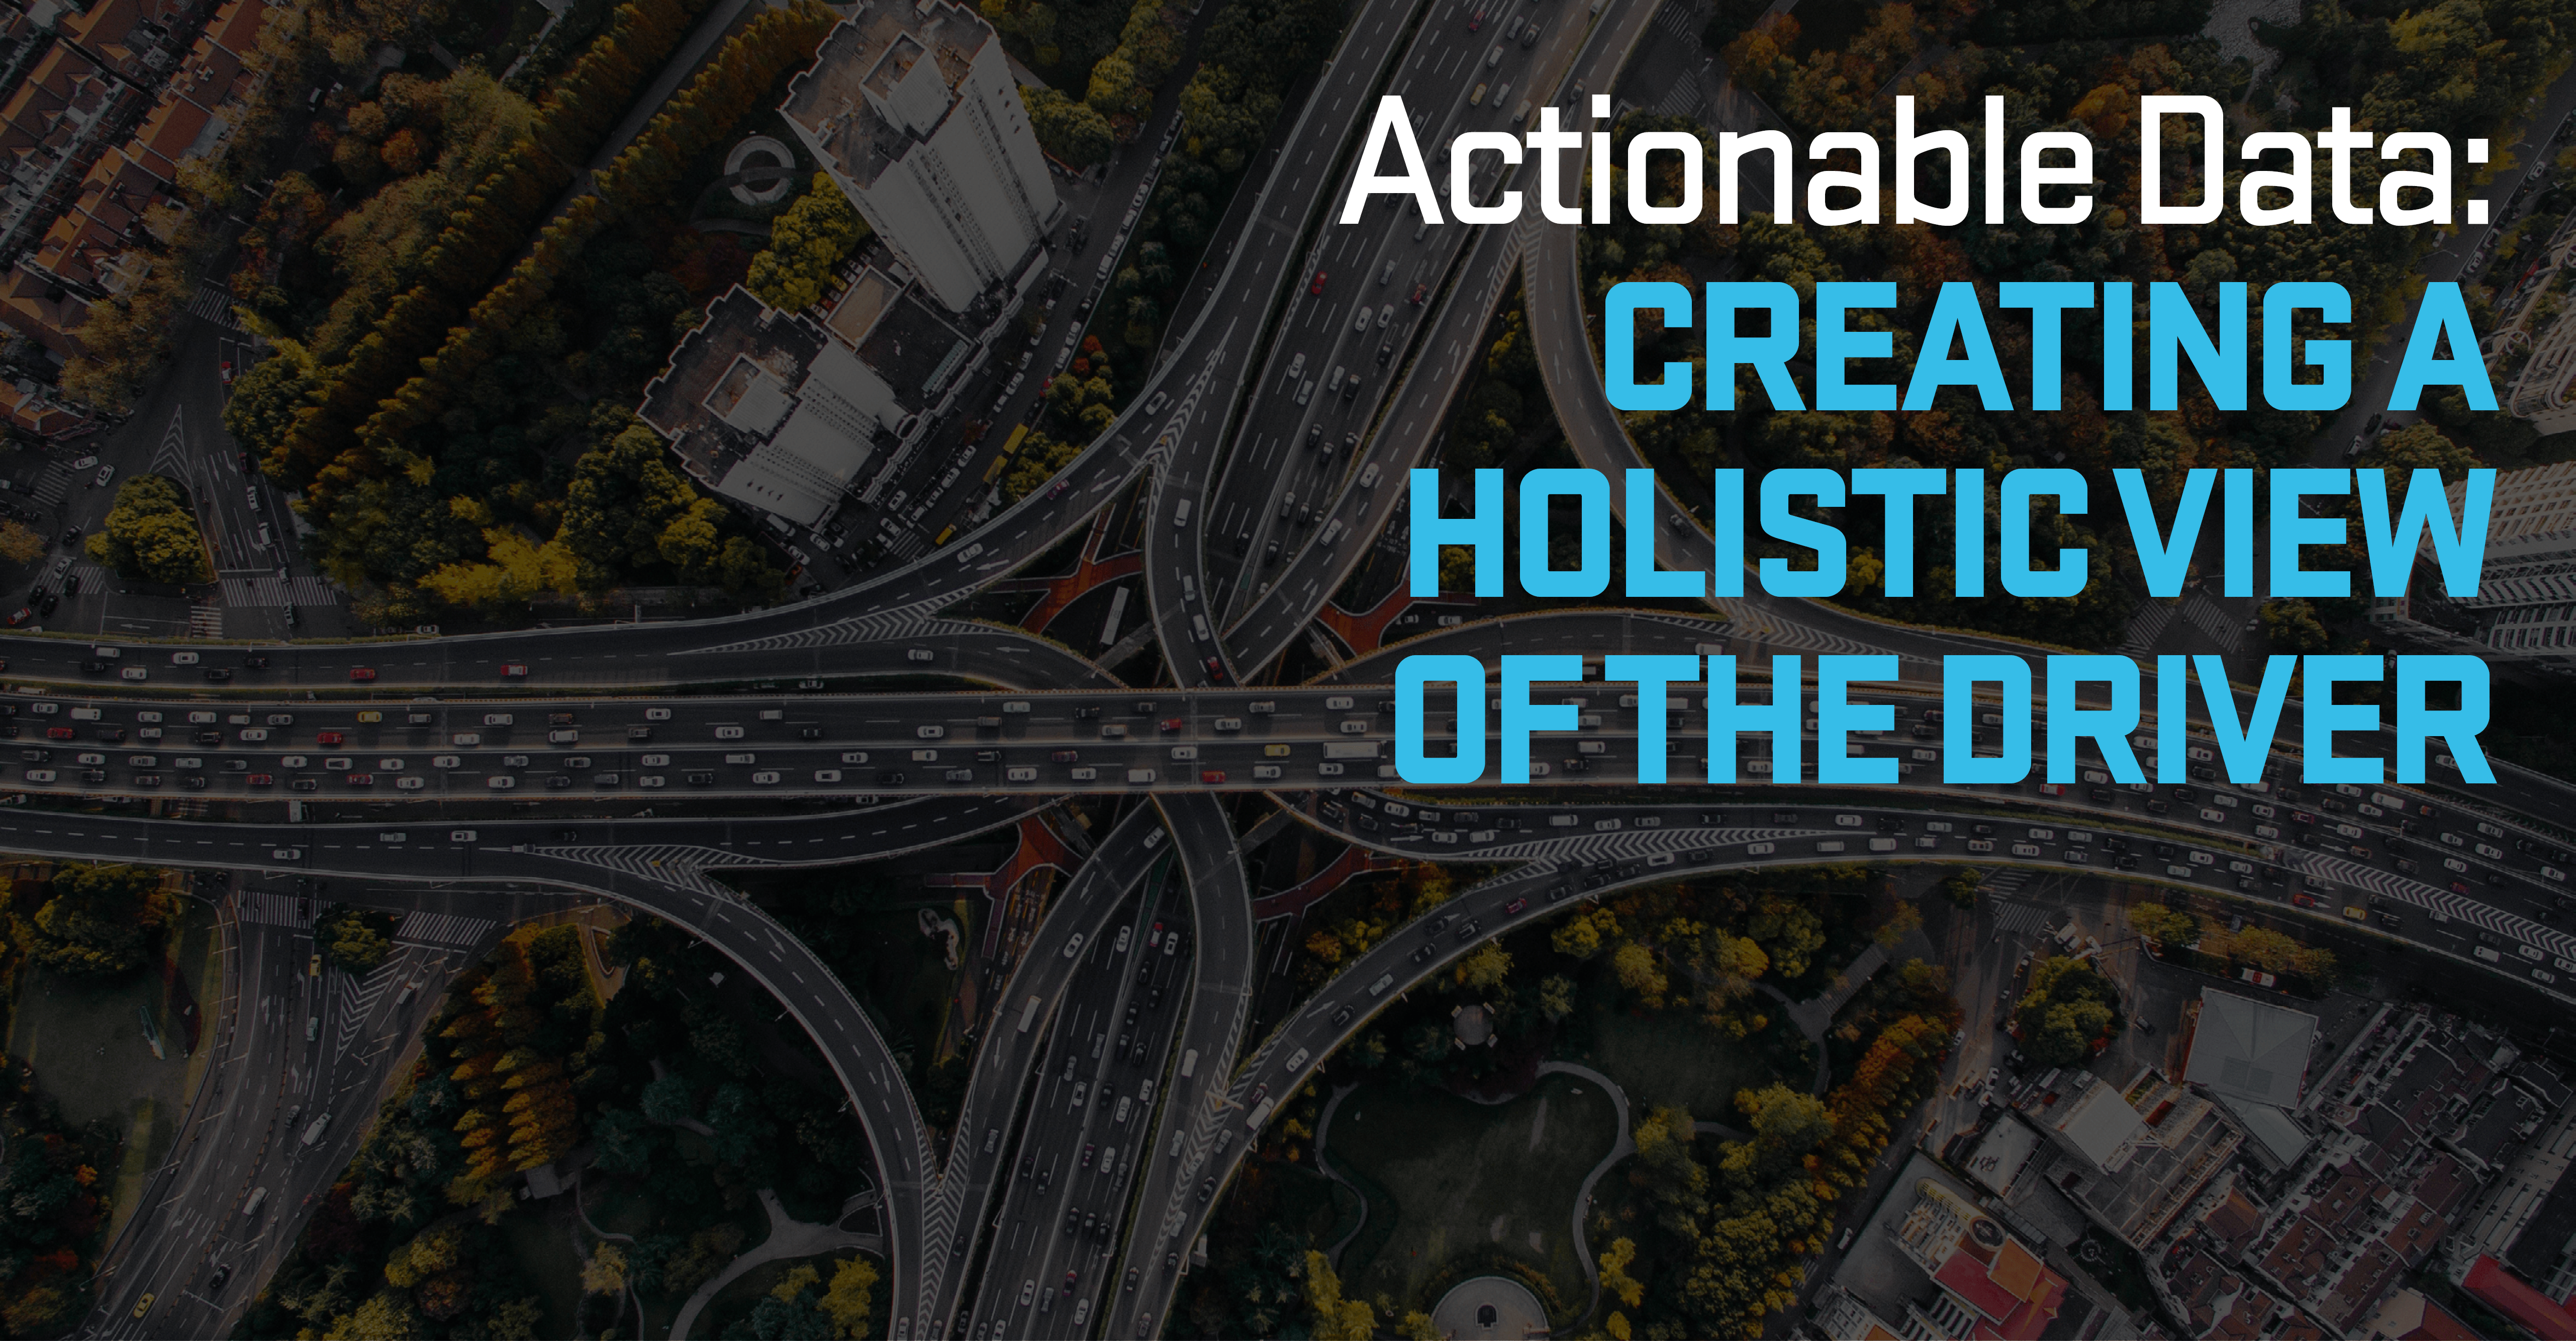 Actionable Data: Creating a Holistic View of the Driver